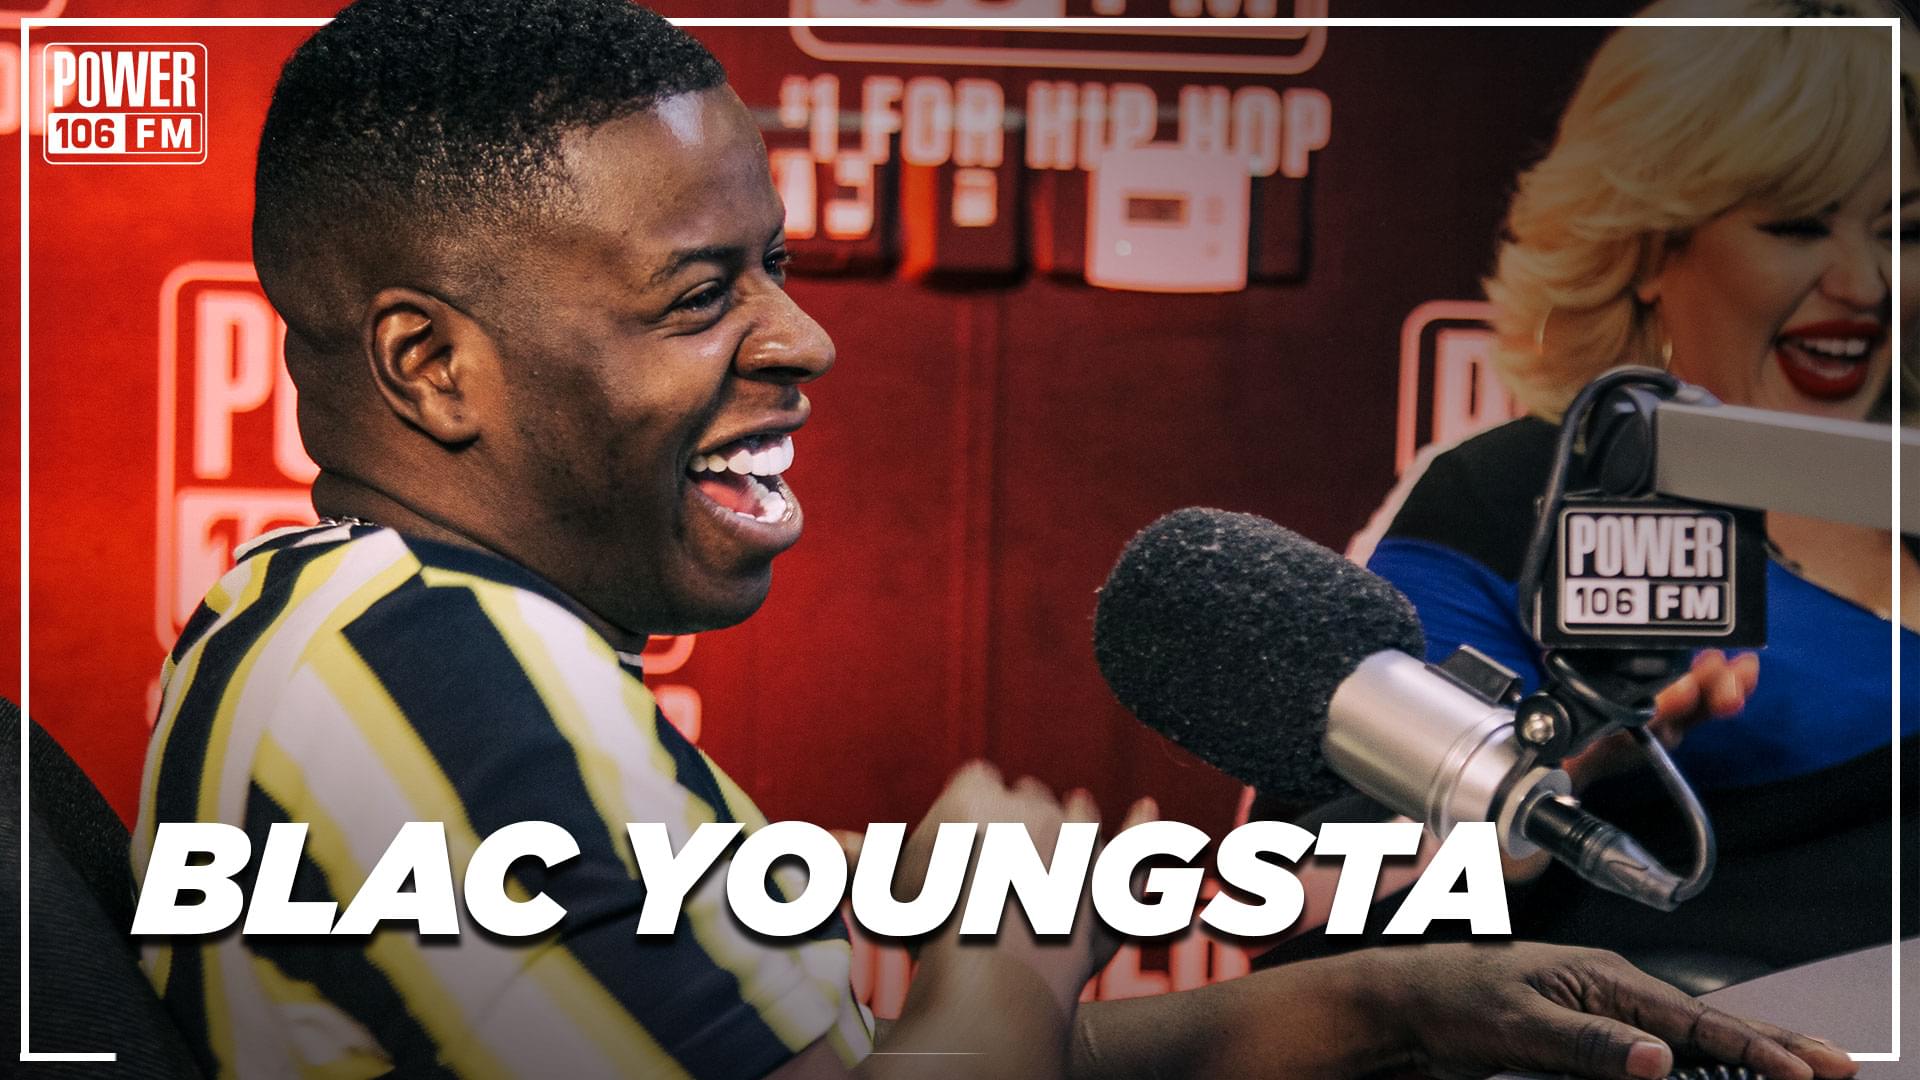 Blac Youngsta On “Booty,” Wild House Parties & How to Speak ‘Memphis’ [WATCH]